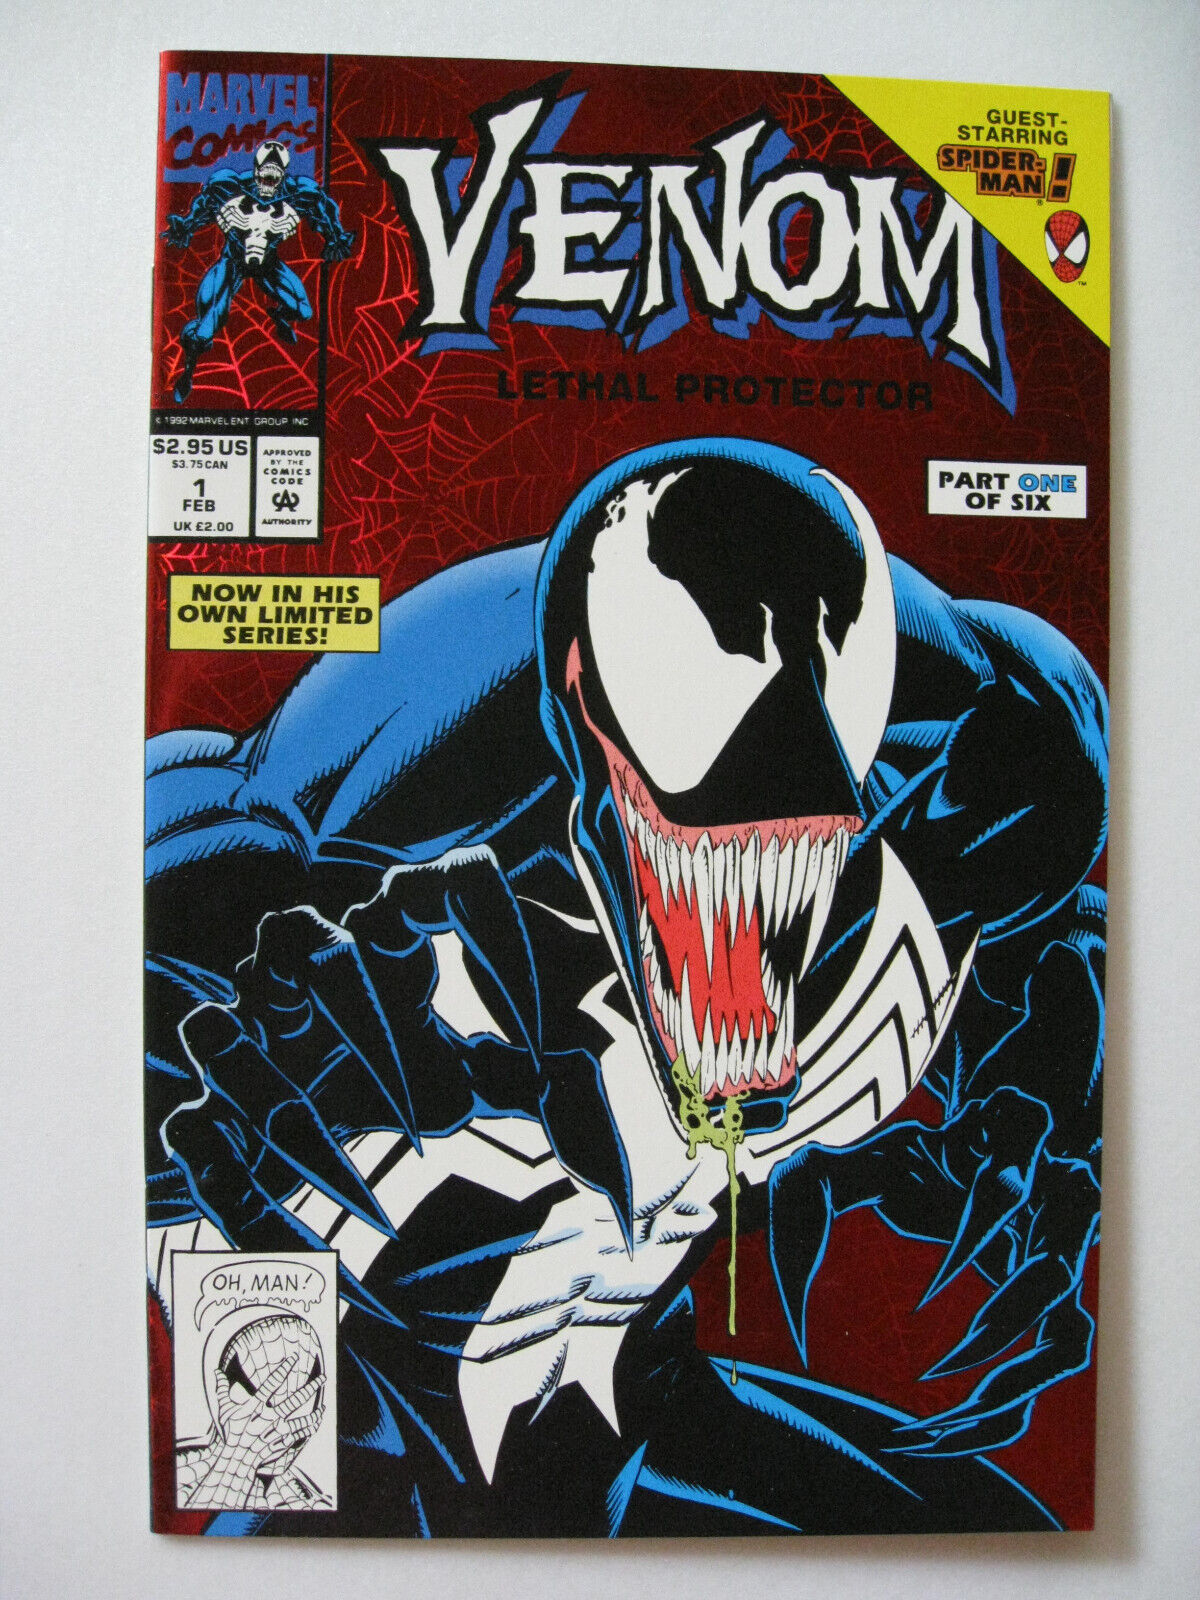 Venom: Lethal Protector #1 - 1st solo title 1st cameo Orwell - Marvel movie NICE